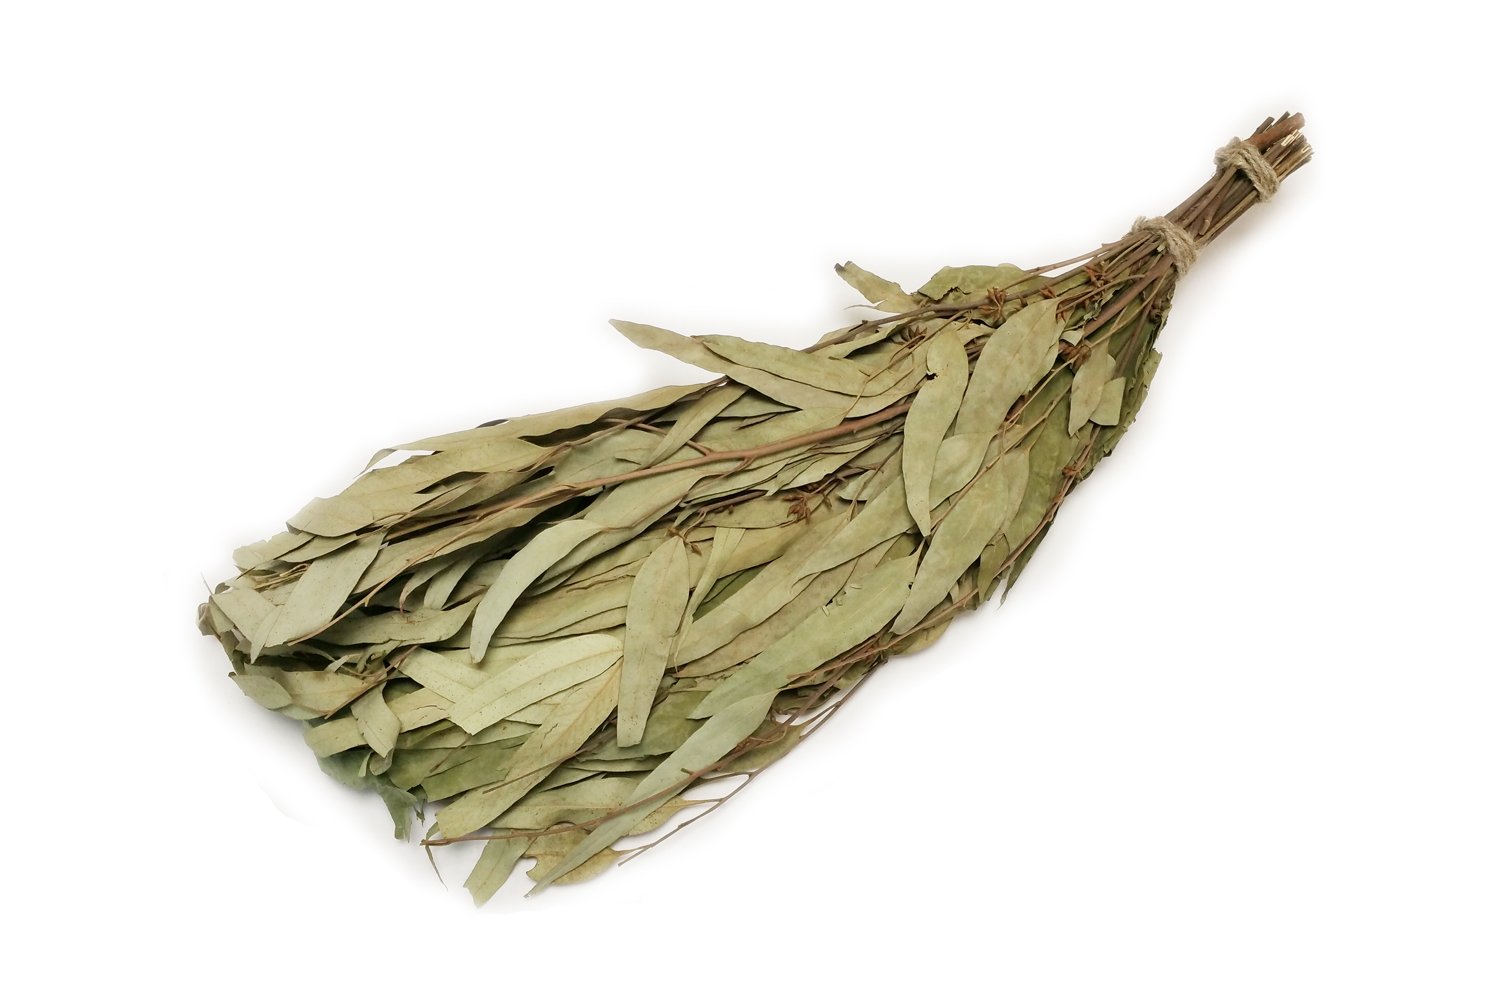 Eucalyptus Long Leaf Sauna whisk made from dried eucalyptus leaves.